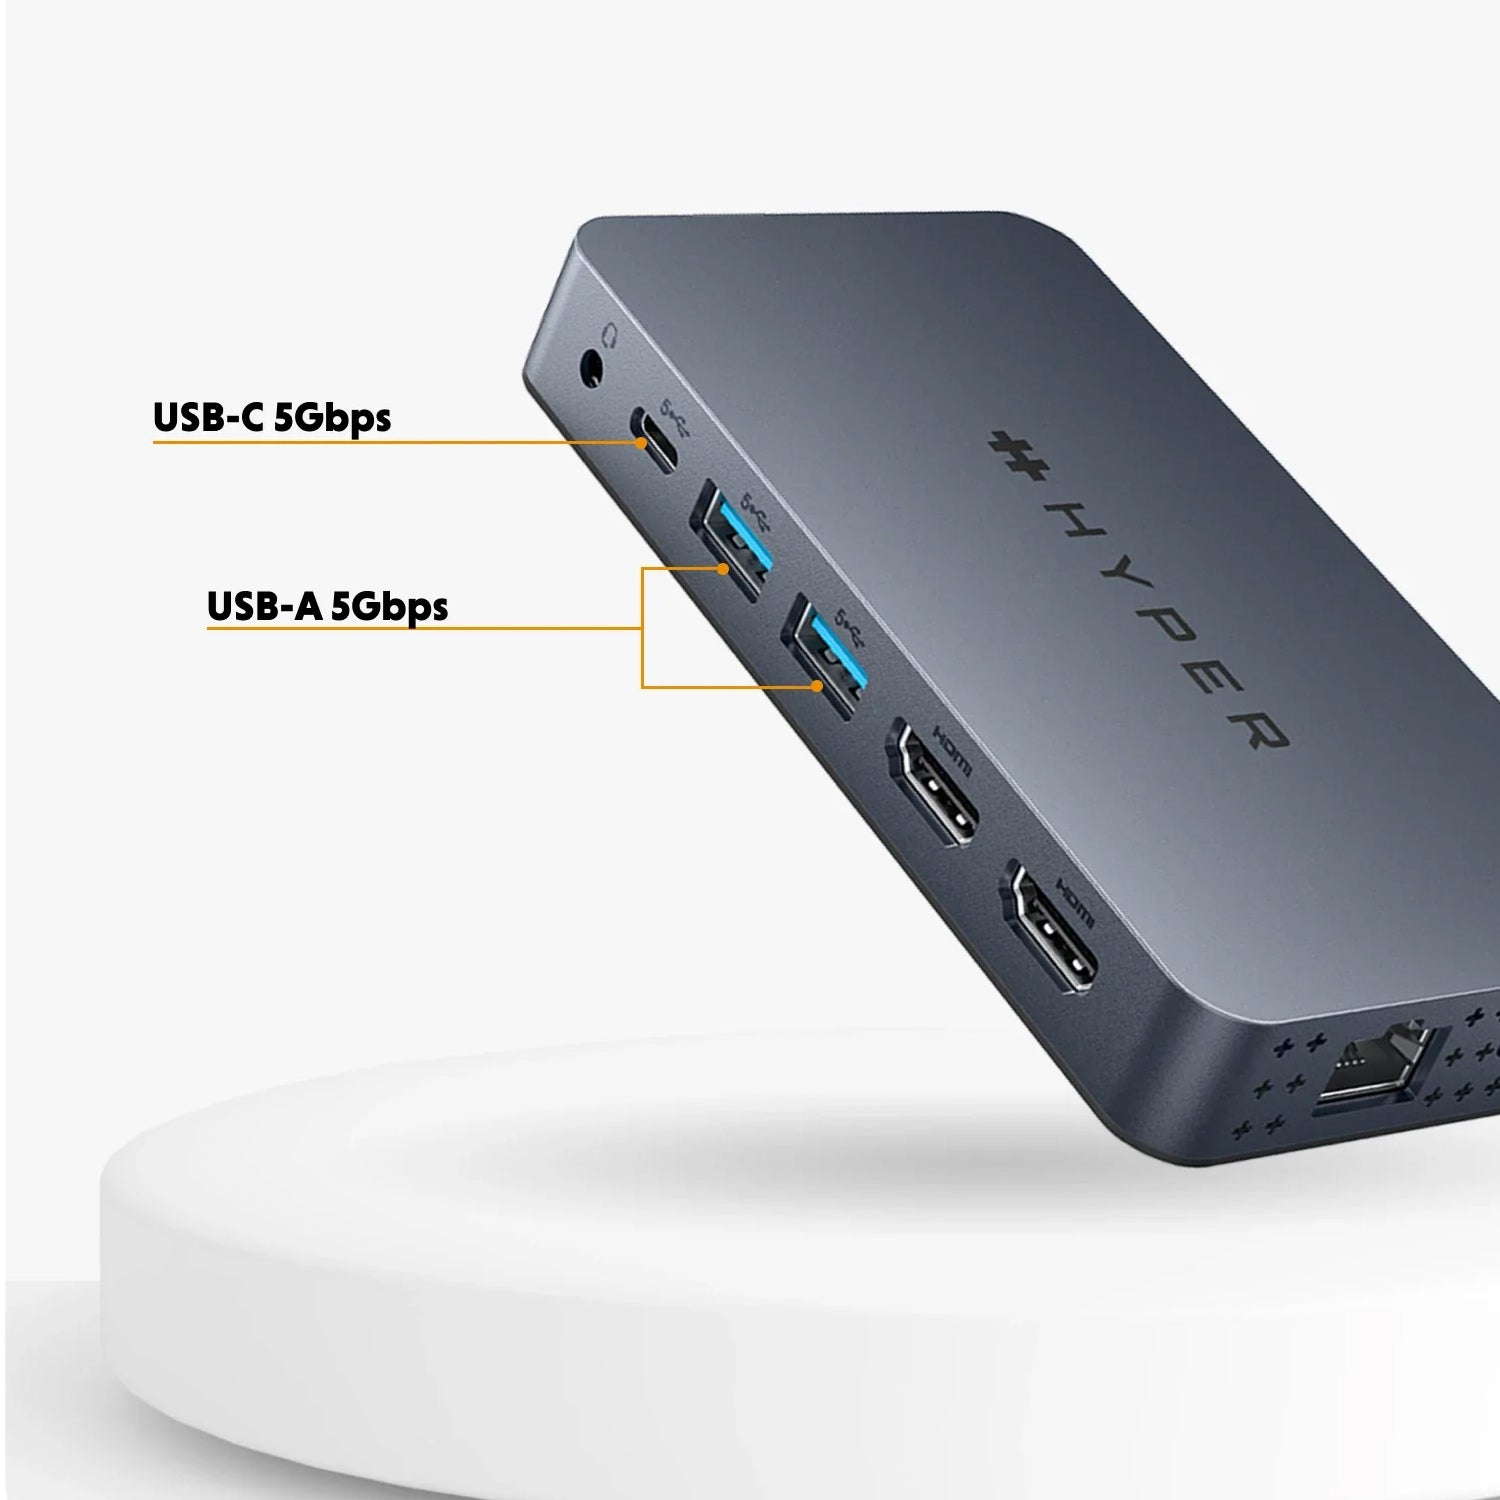 HyperDrive Next Dual 4K HDMI 10 Port USB-C ハブ For M1, M2, and M3 MacBooks